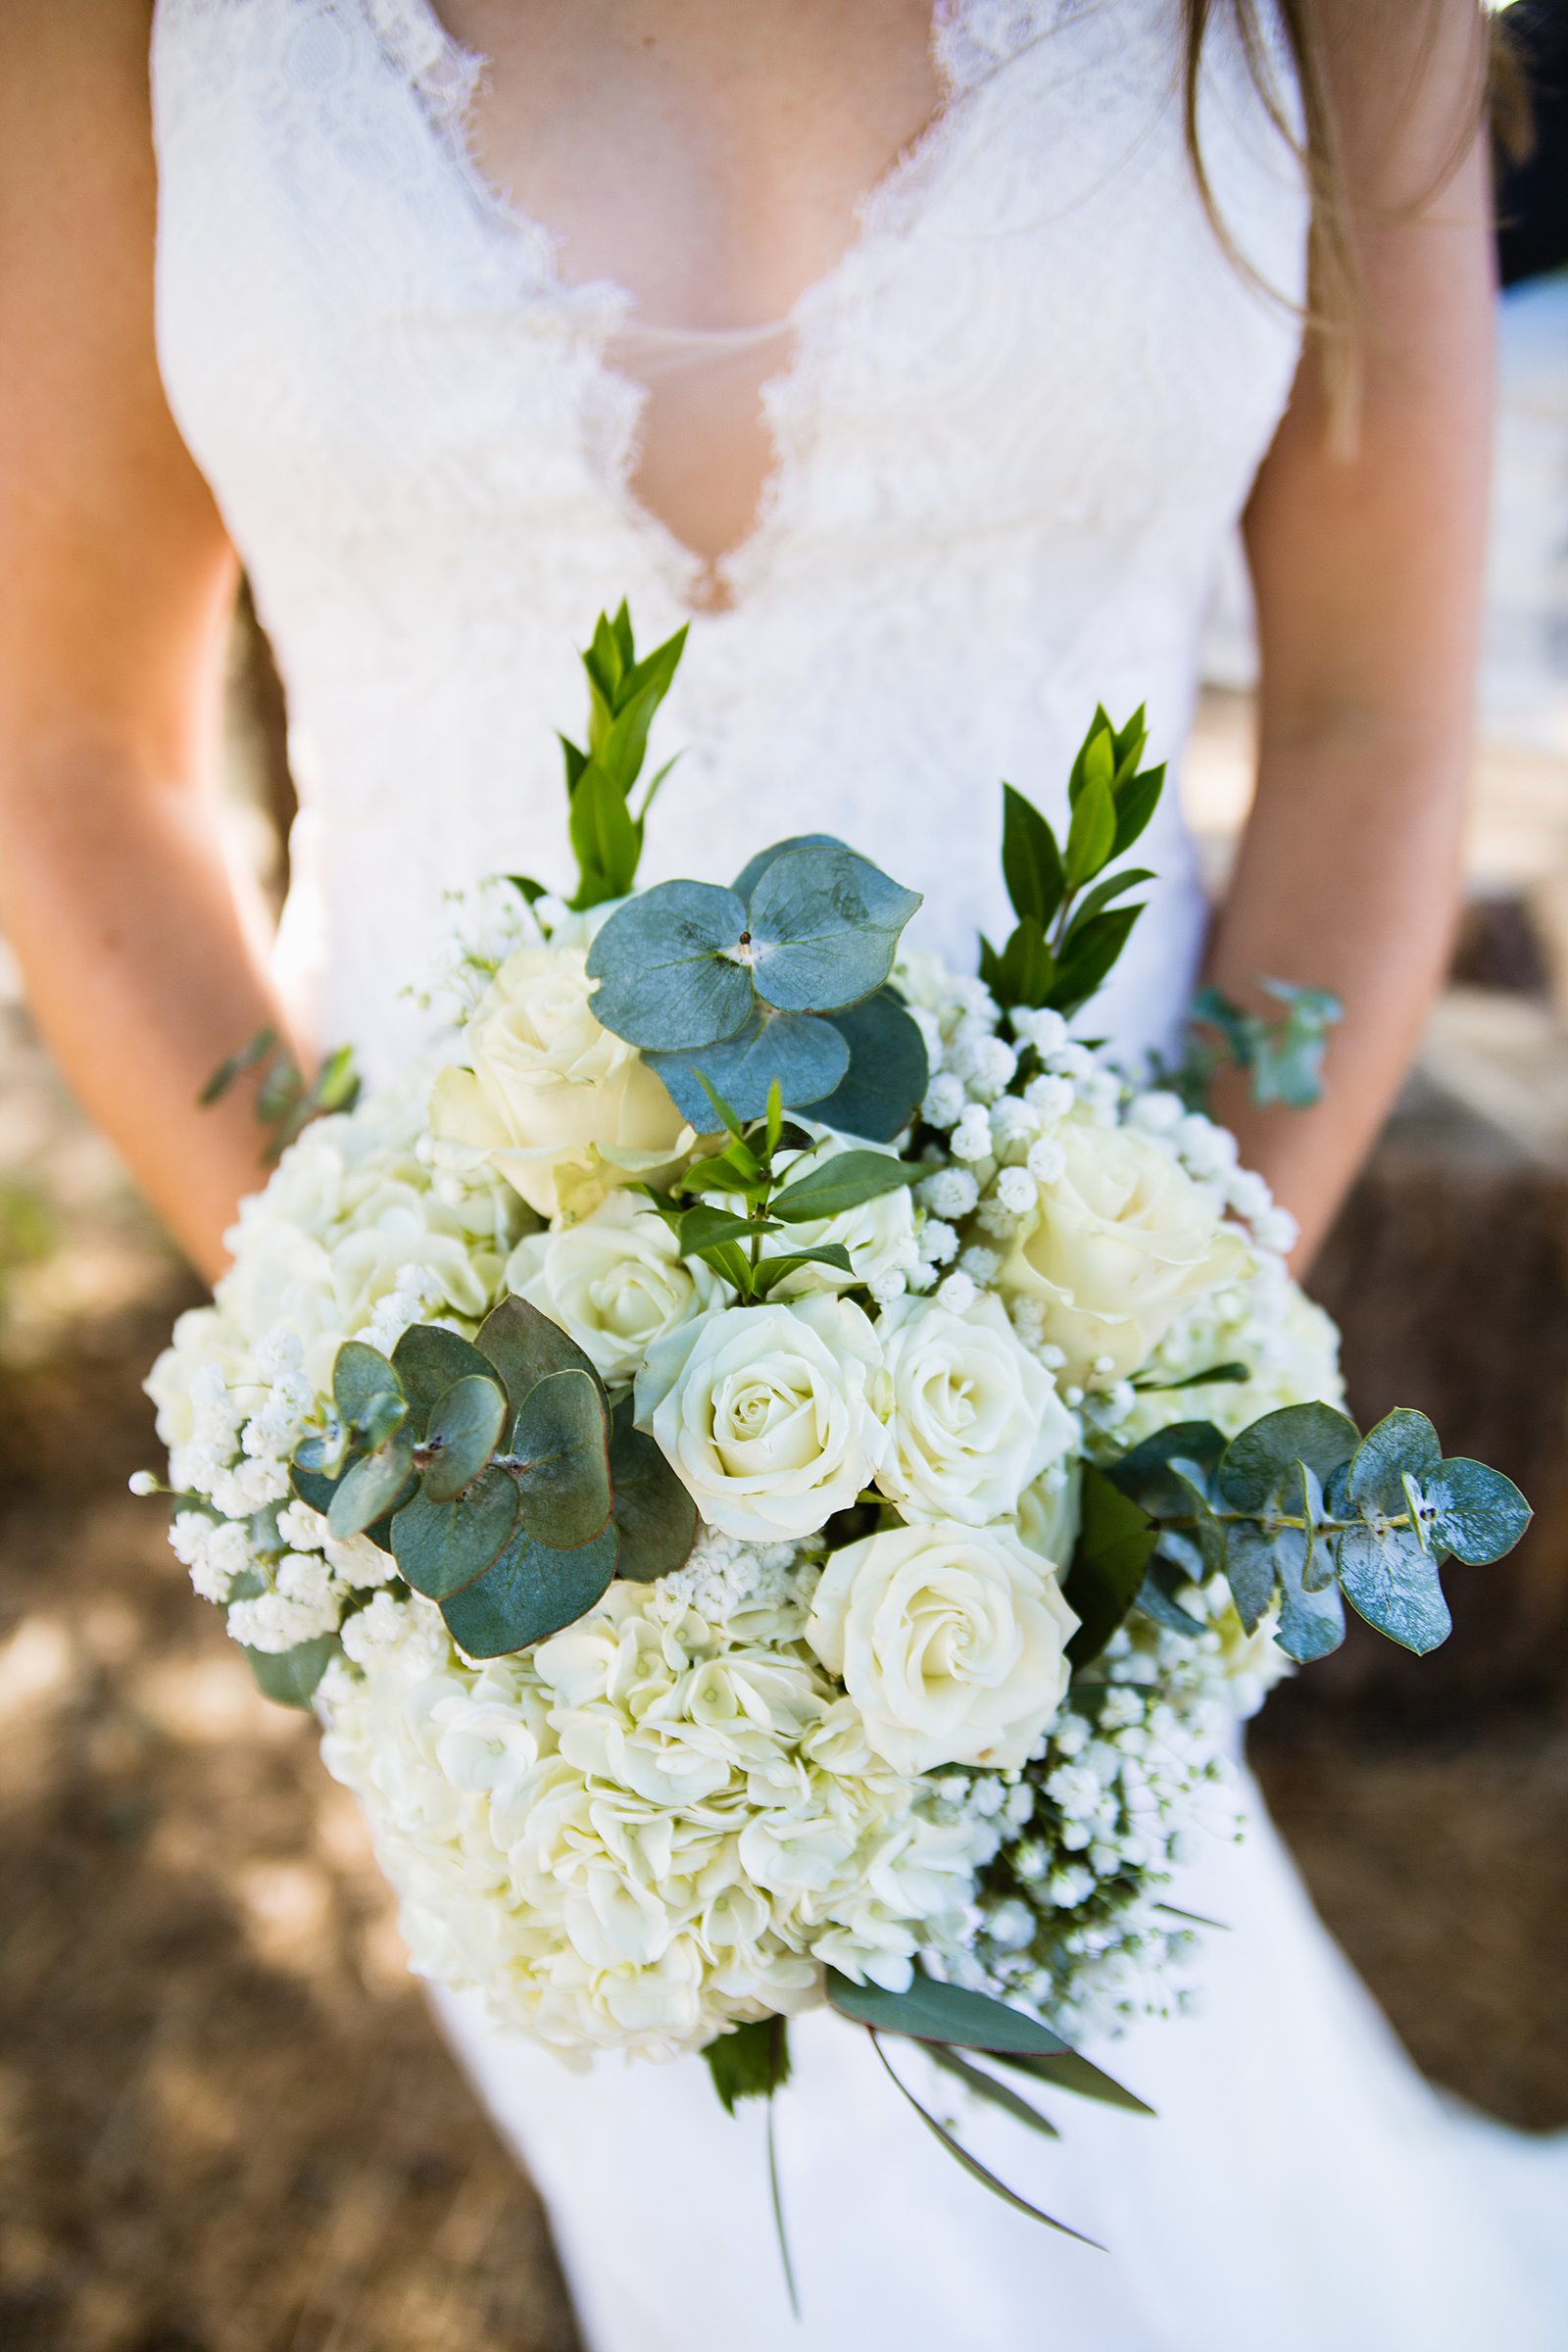 Bride's simple white and green DIY bouquet by PMA Photography.